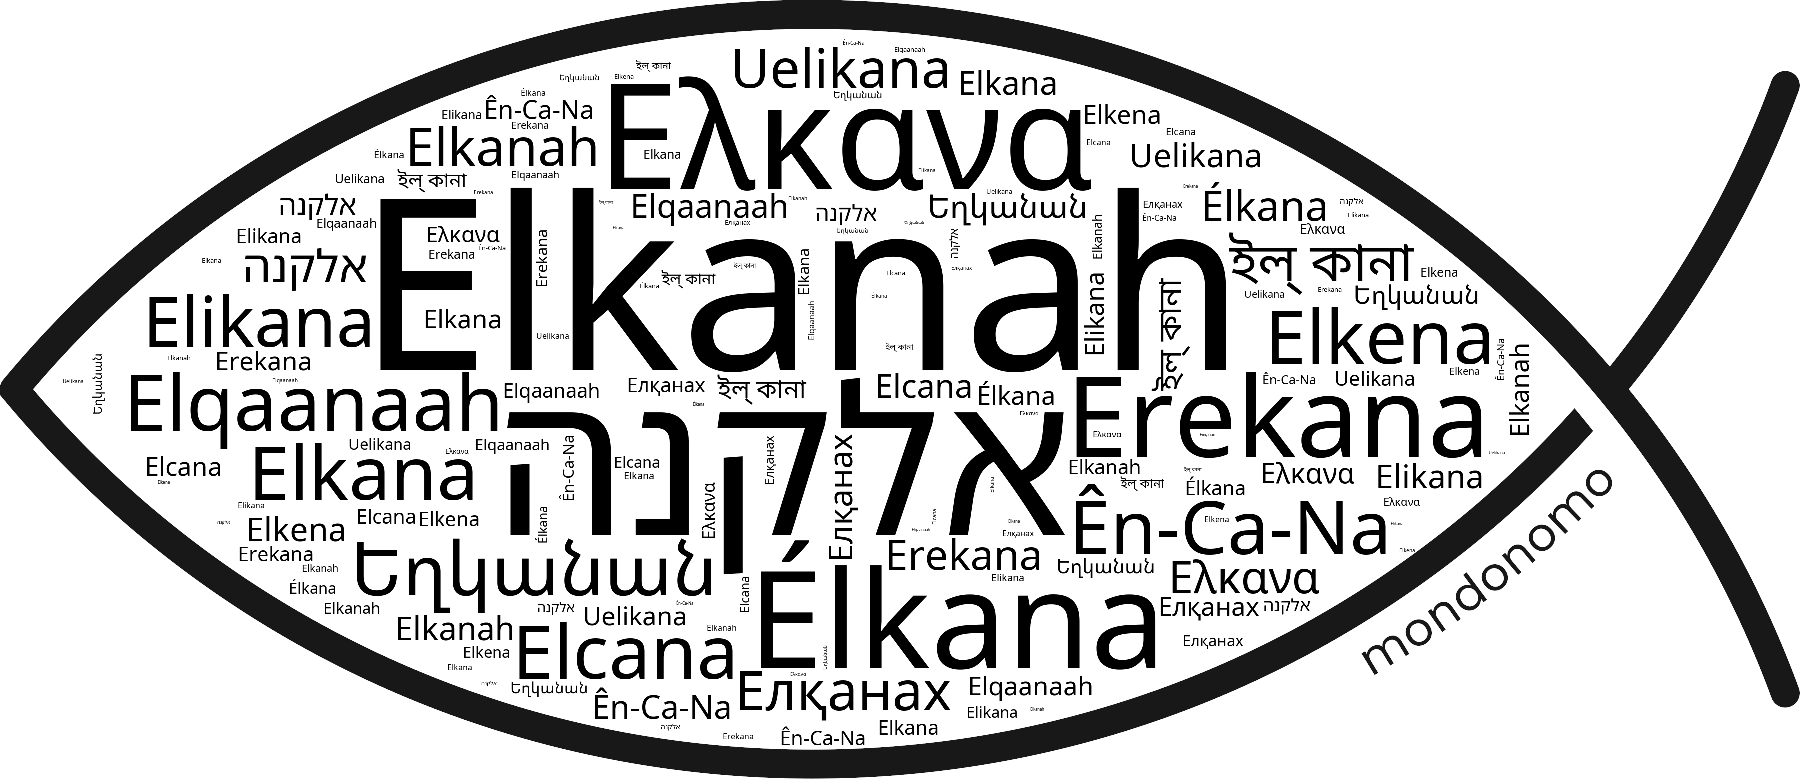 Name Elkanah in the world's Bibles